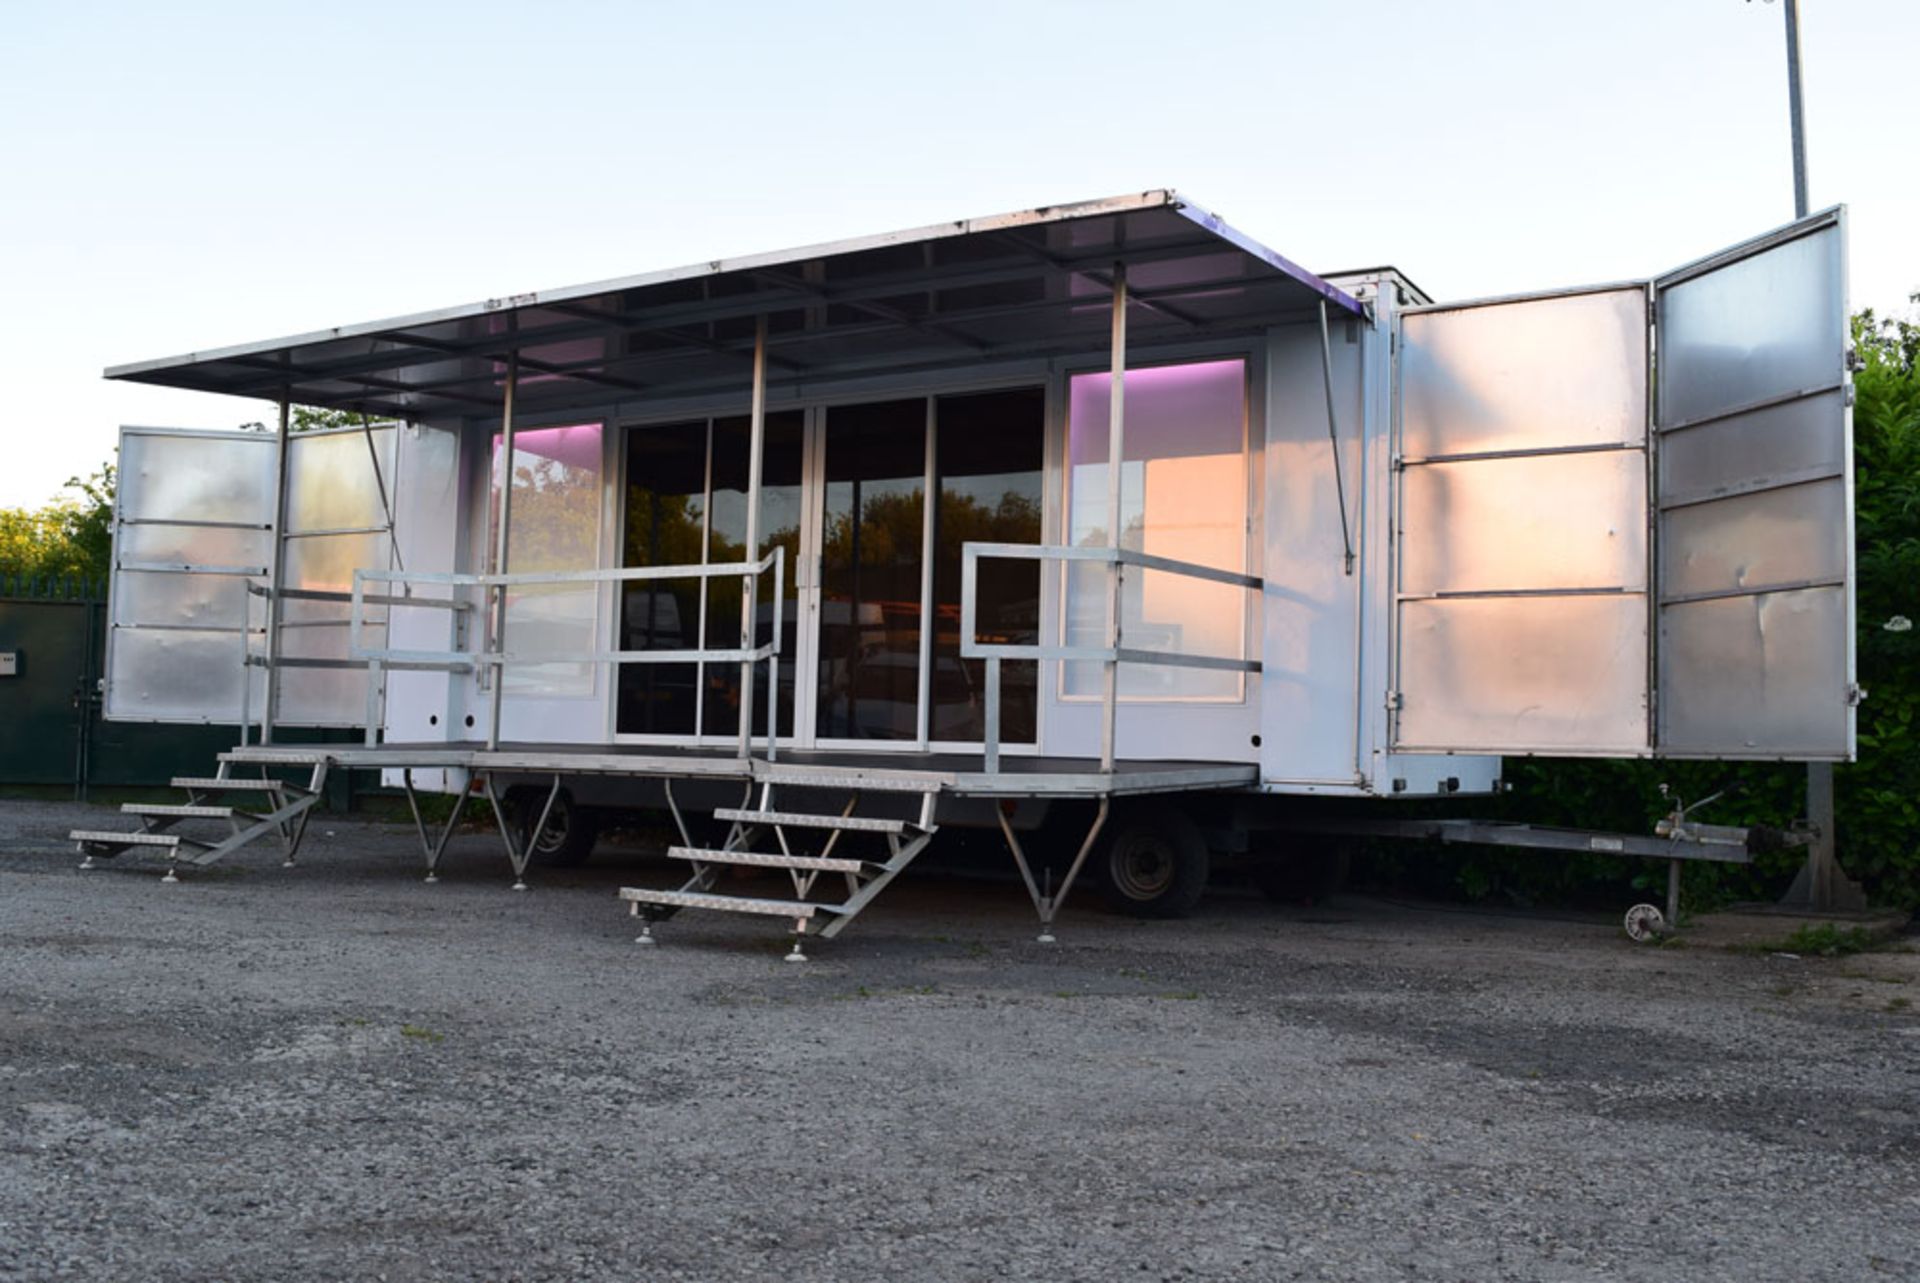 Torton 7 Meter Exhibition Show Hospitality Trailer (3.5 tonne trailer) - Image 7 of 17